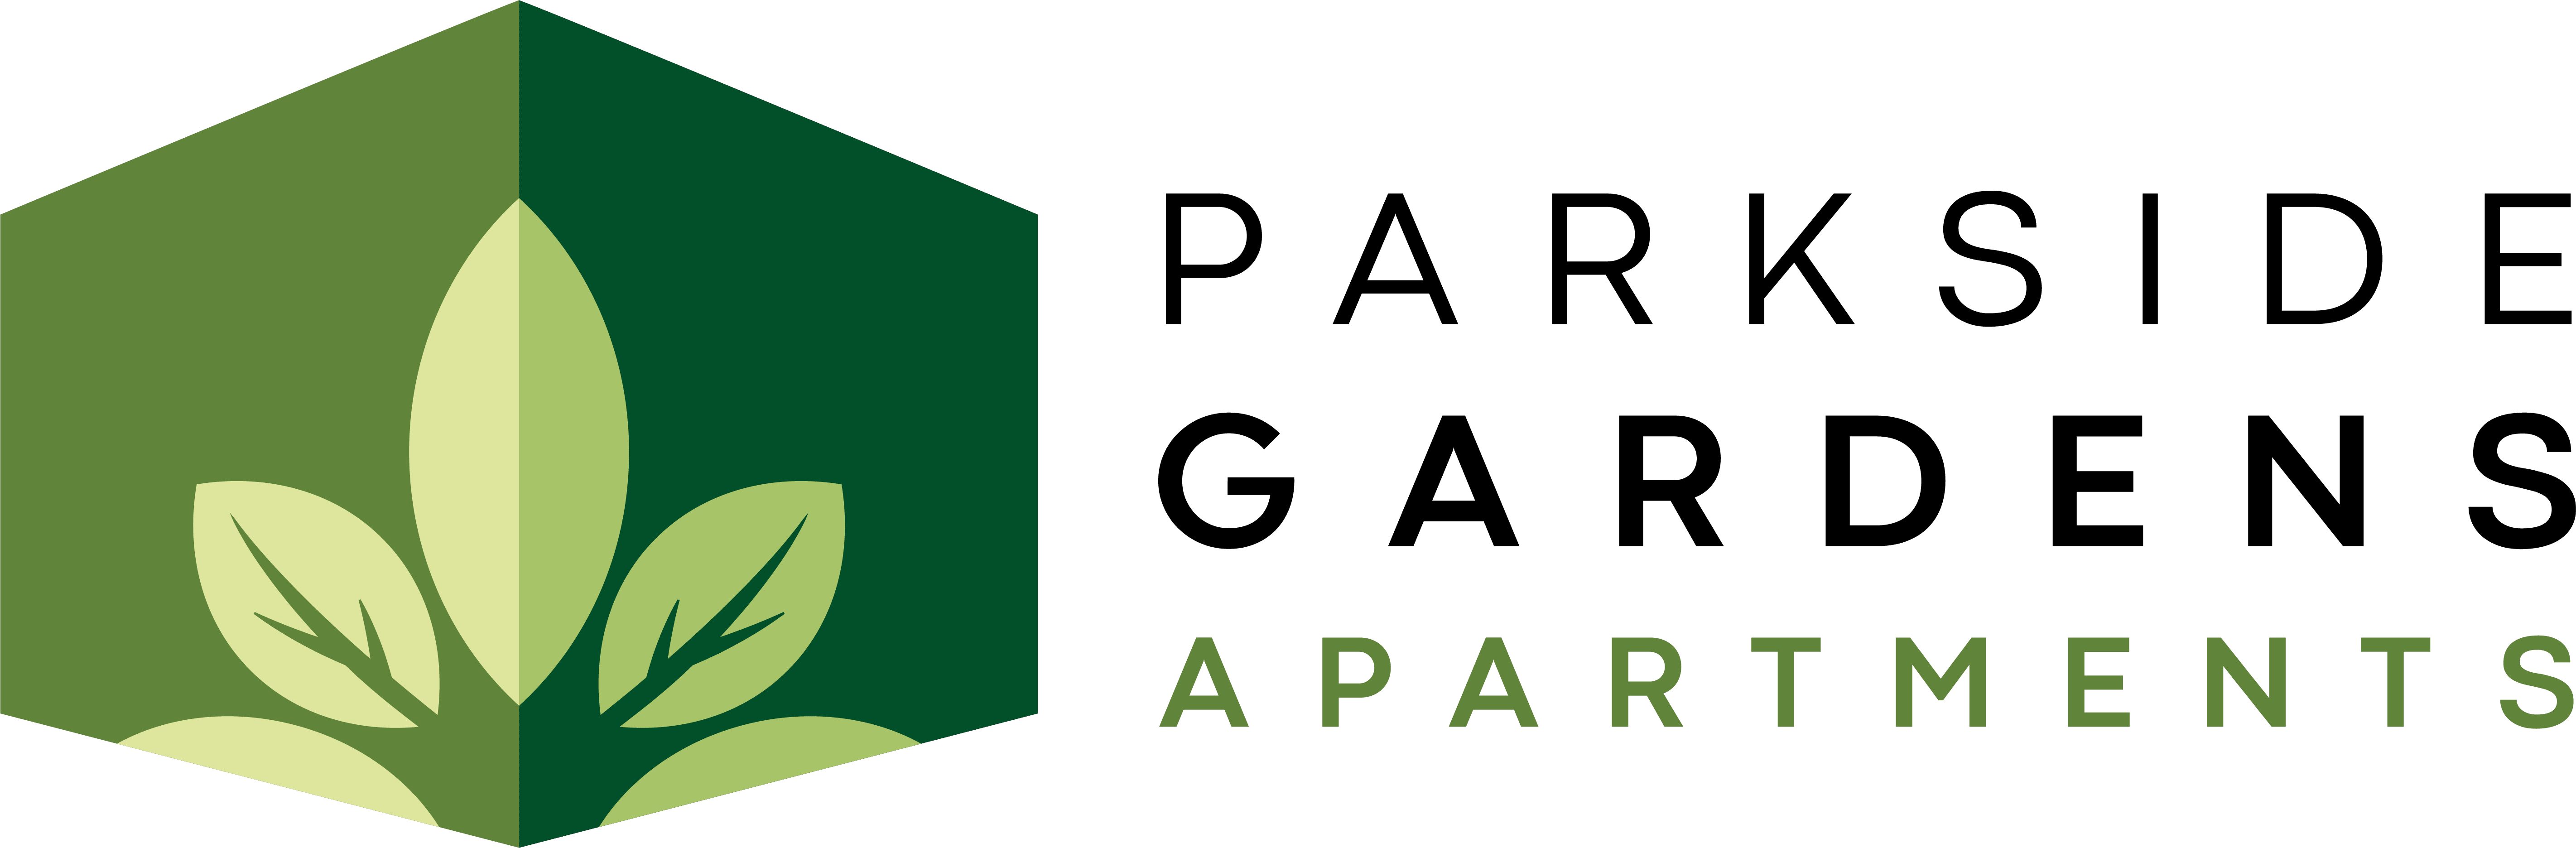 Parkside Gardens  Apartments in Euclid, OH